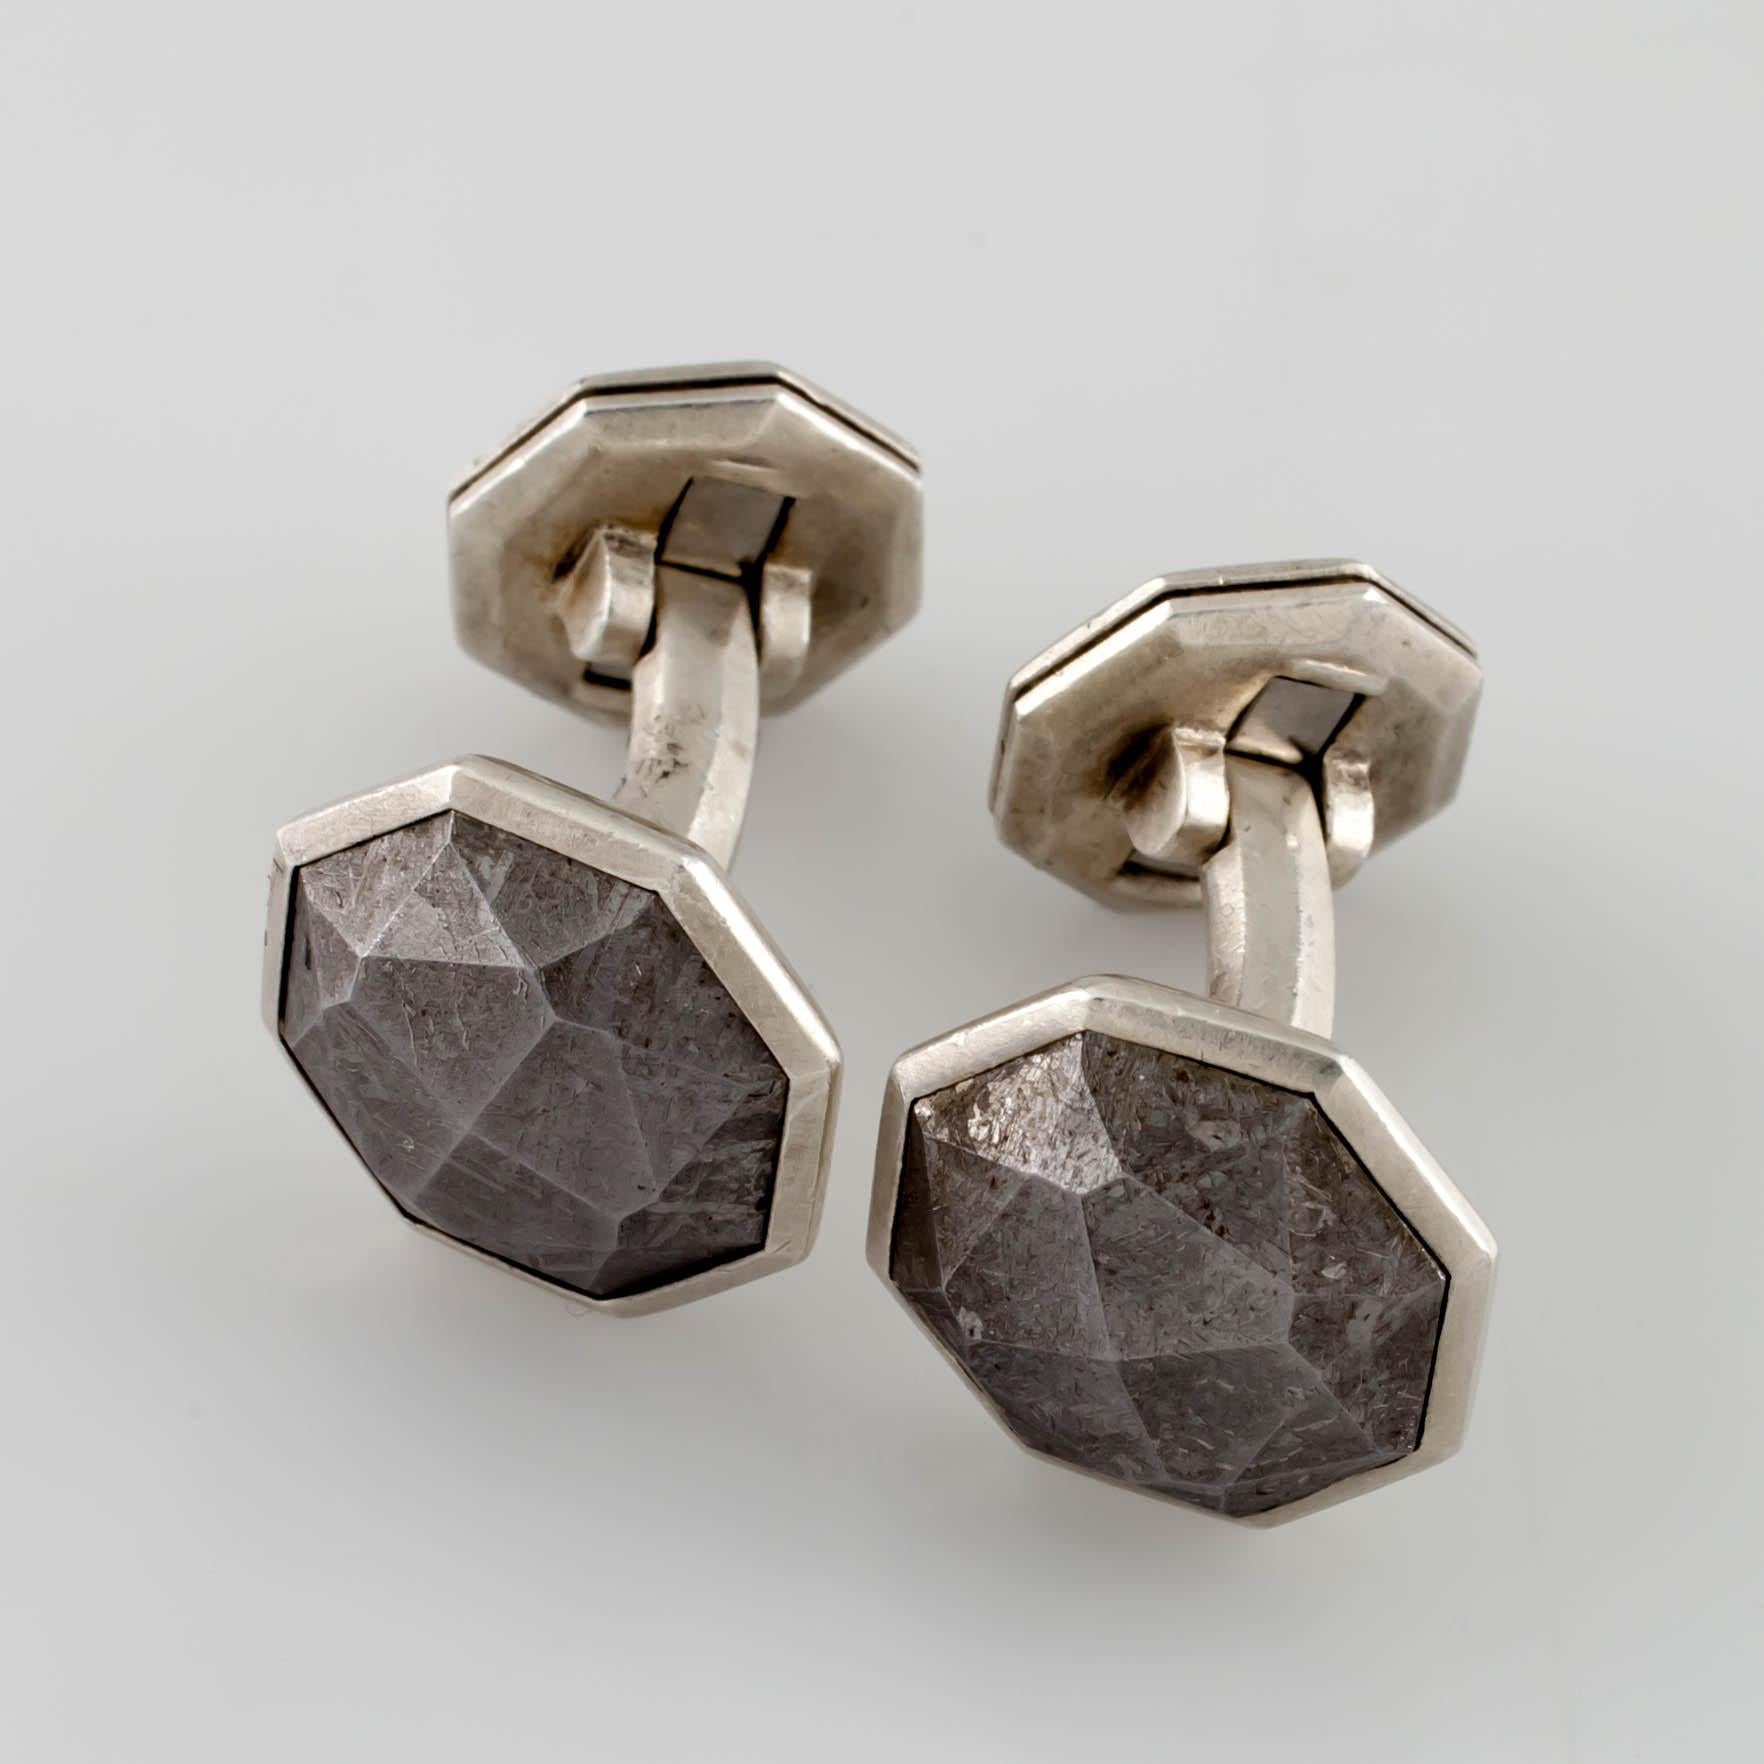 Gorgeous Sterling Silver Cufflinks by David Yurman
Feature Faceted Meteorites in Octogonal Settings
Width of Setting = 15 mm
Total Mass = 20.3 grams
Current Retail Value = $1100
A Great Deal!